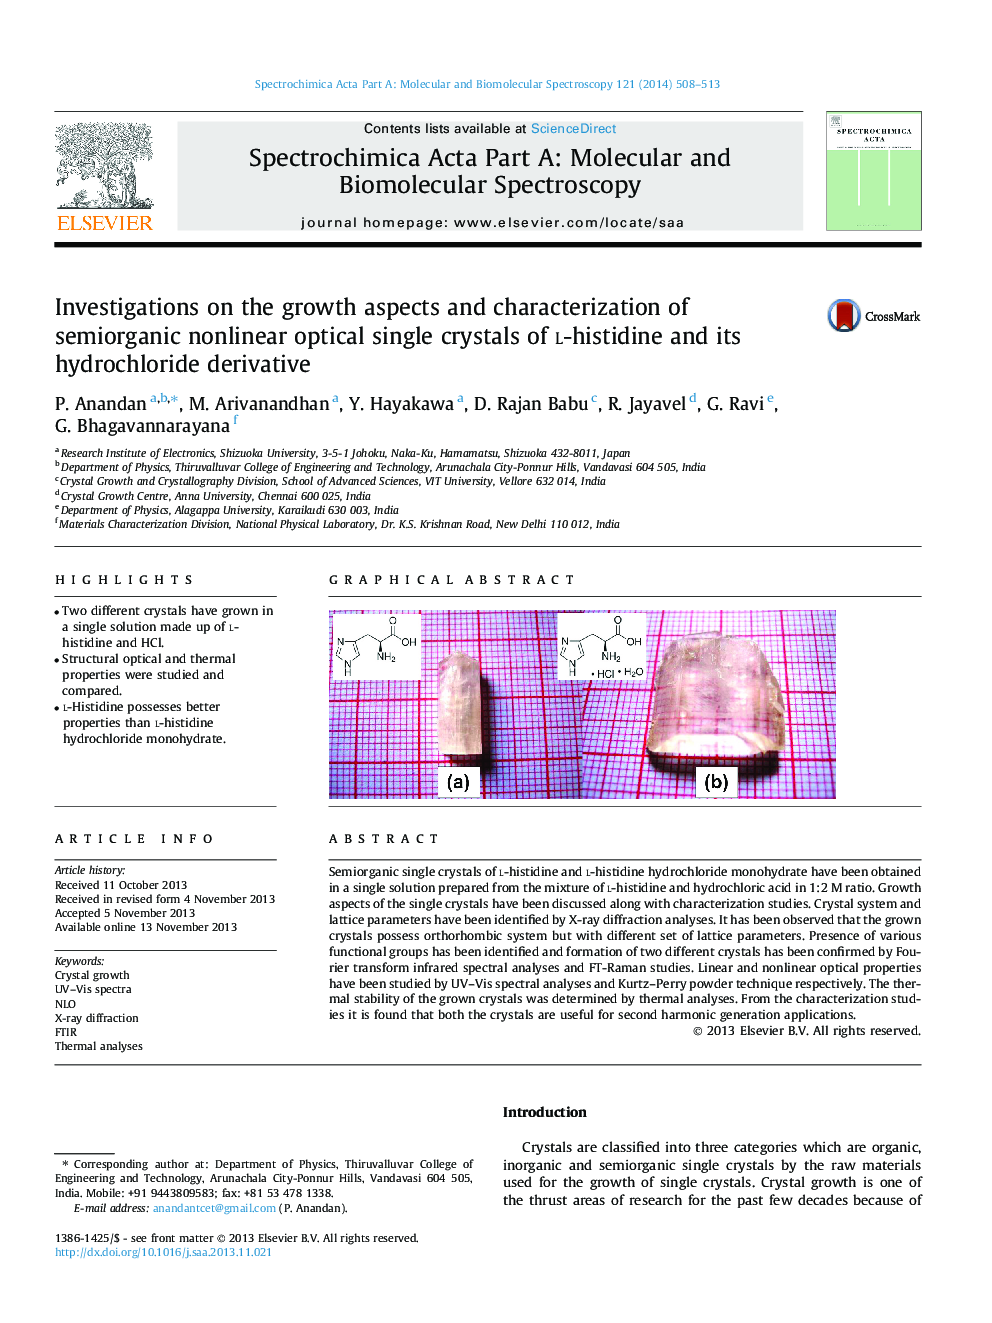 Investigations on the growth aspects and characterization of semiorganic nonlinear optical single crystals of l-histidine and its hydrochloride derivative